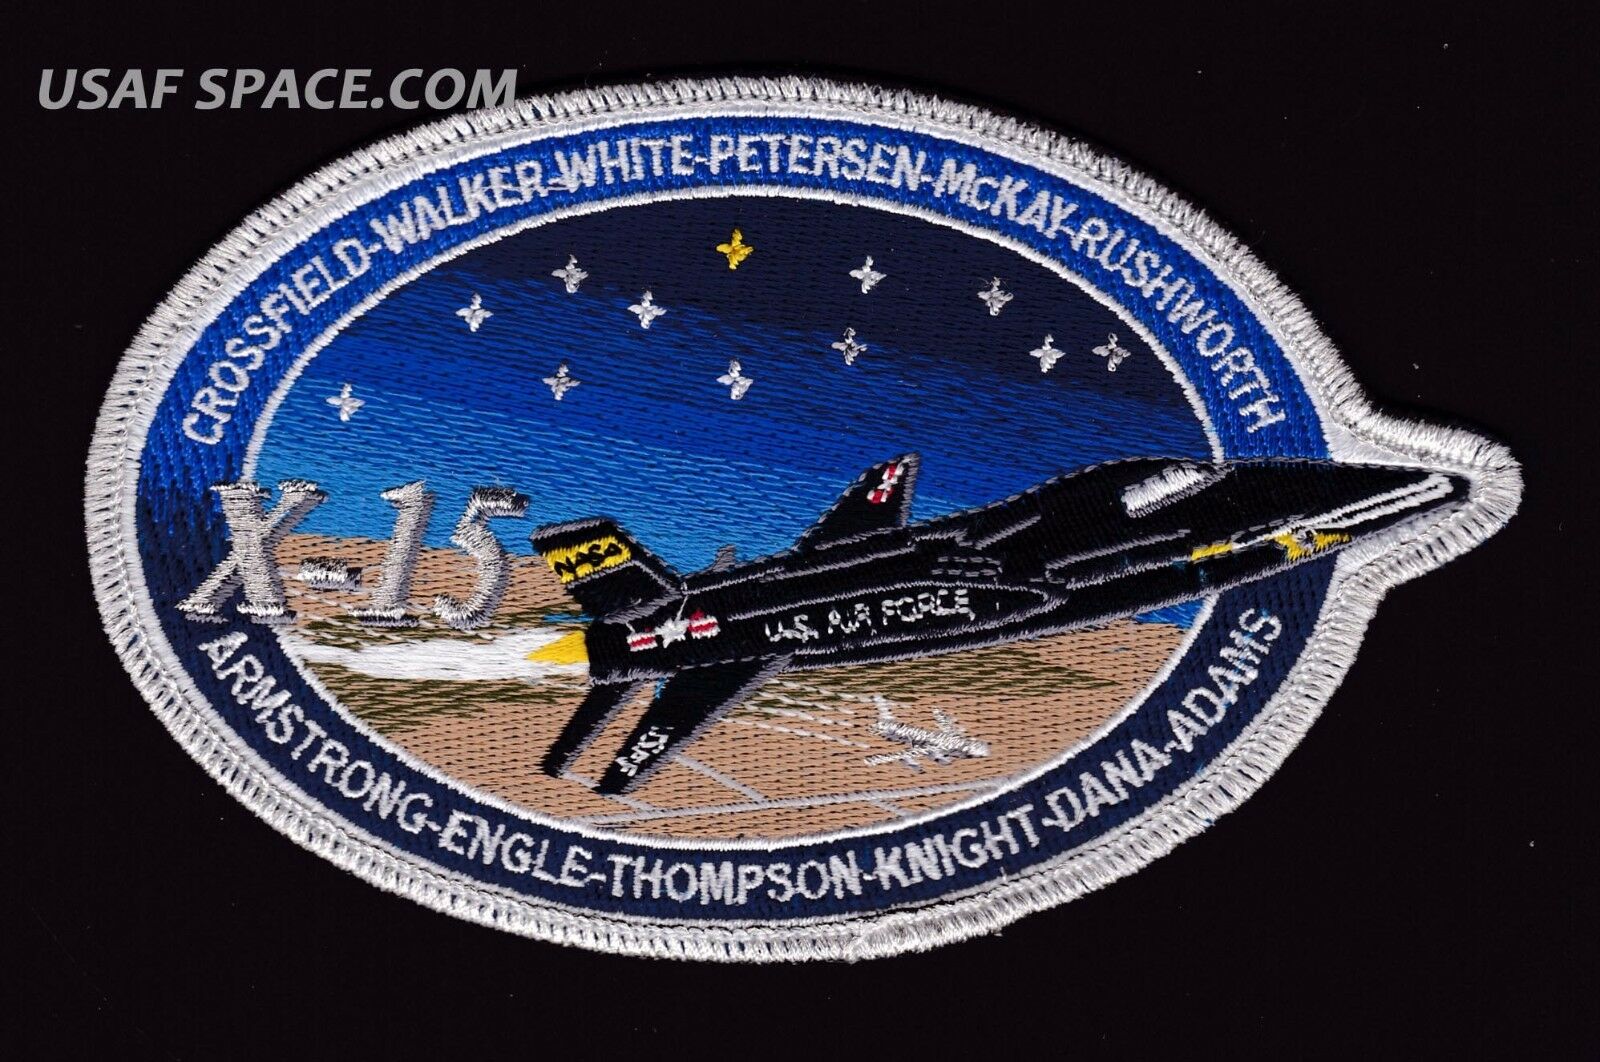 Authentic- X 15 -commemorative 6" Tim Gagnon Armstrong Usaf Nasa Space Patch